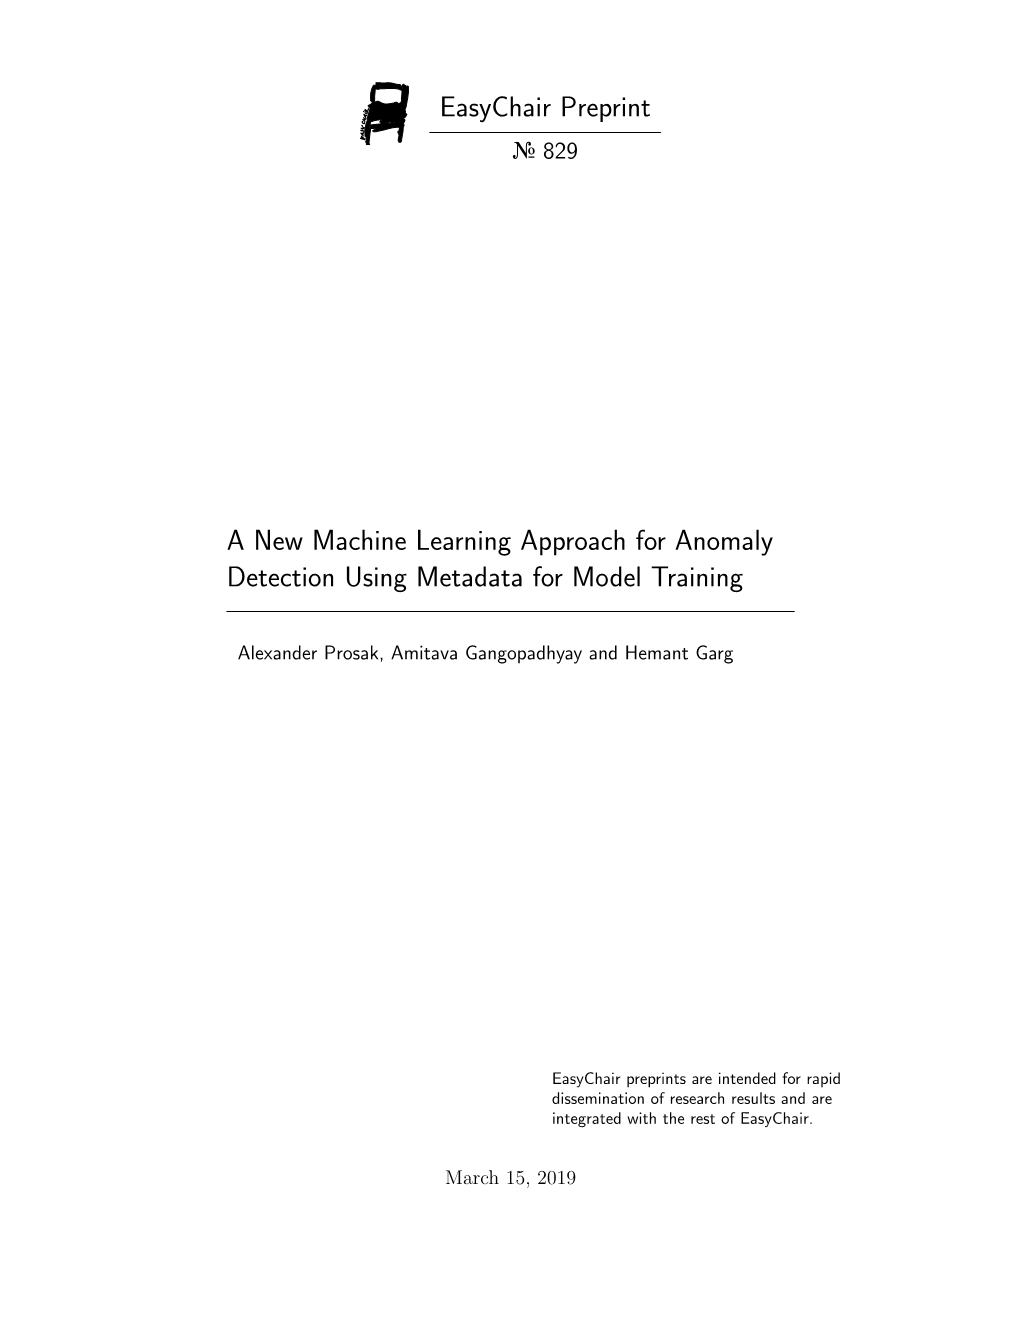 A New Machine Learning Approach for Anomaly Detection Using Metadata for Model Training